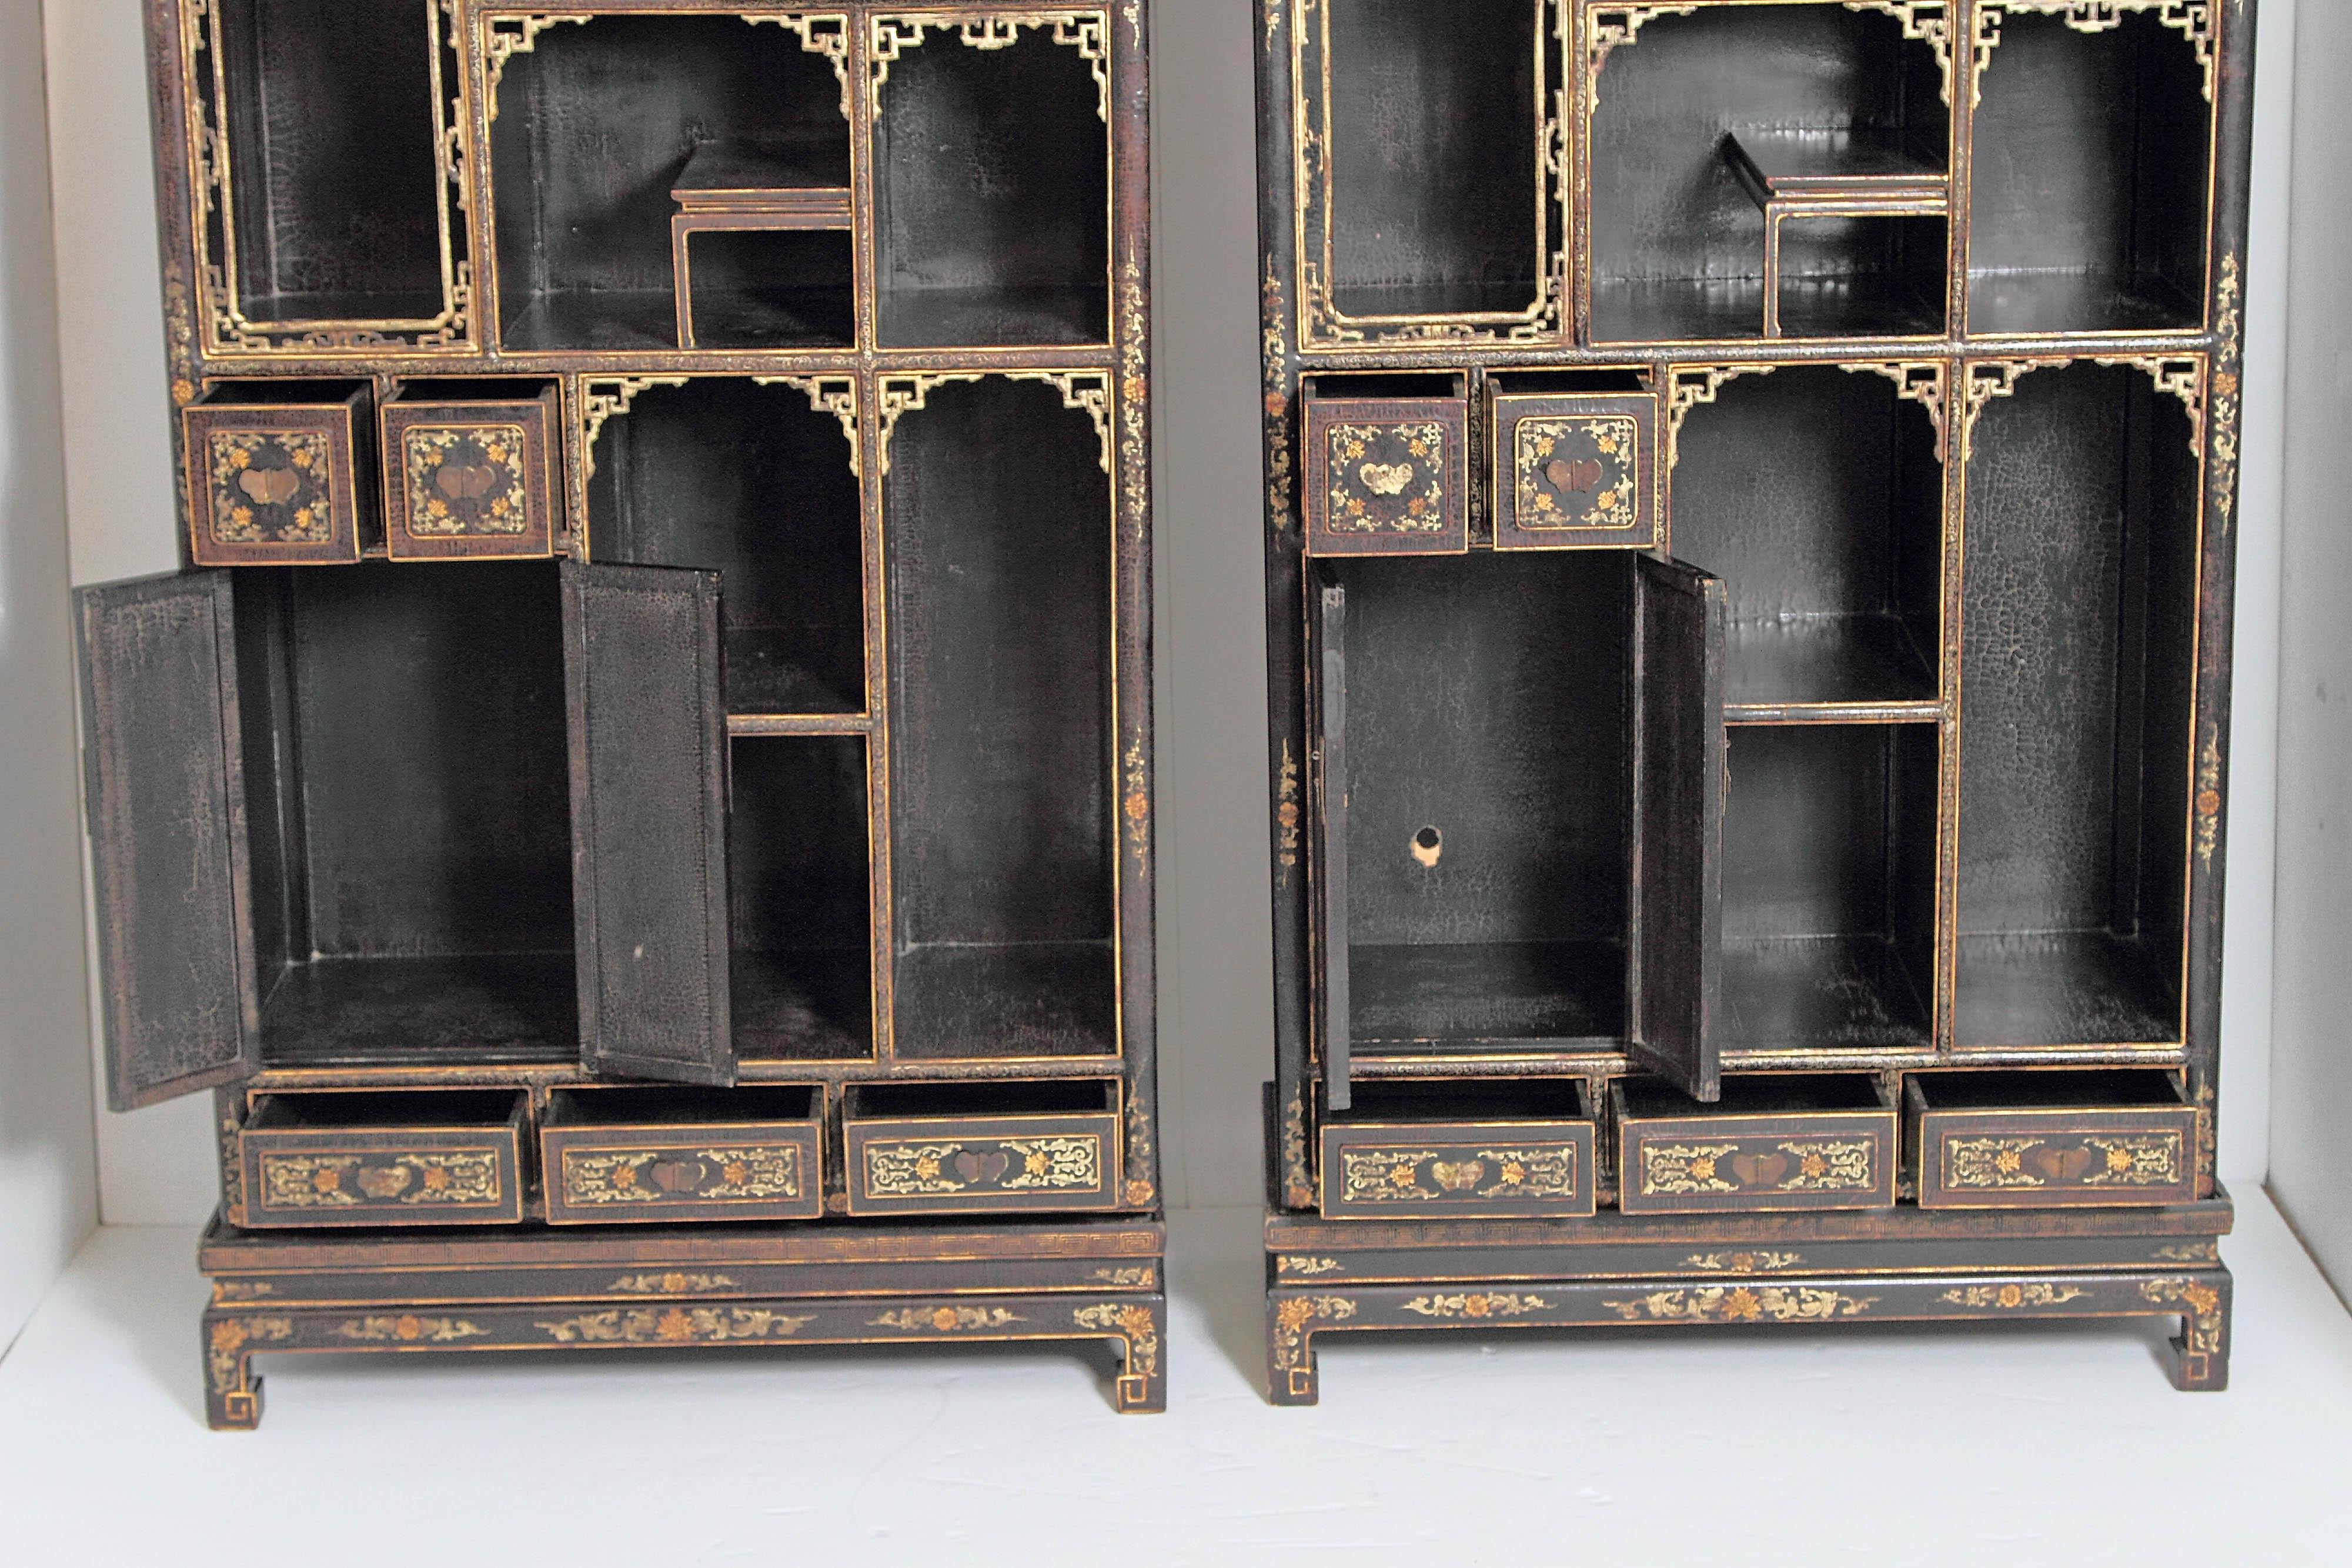 20th Century Pair of Chinese Black Lacquer Display Cabinets